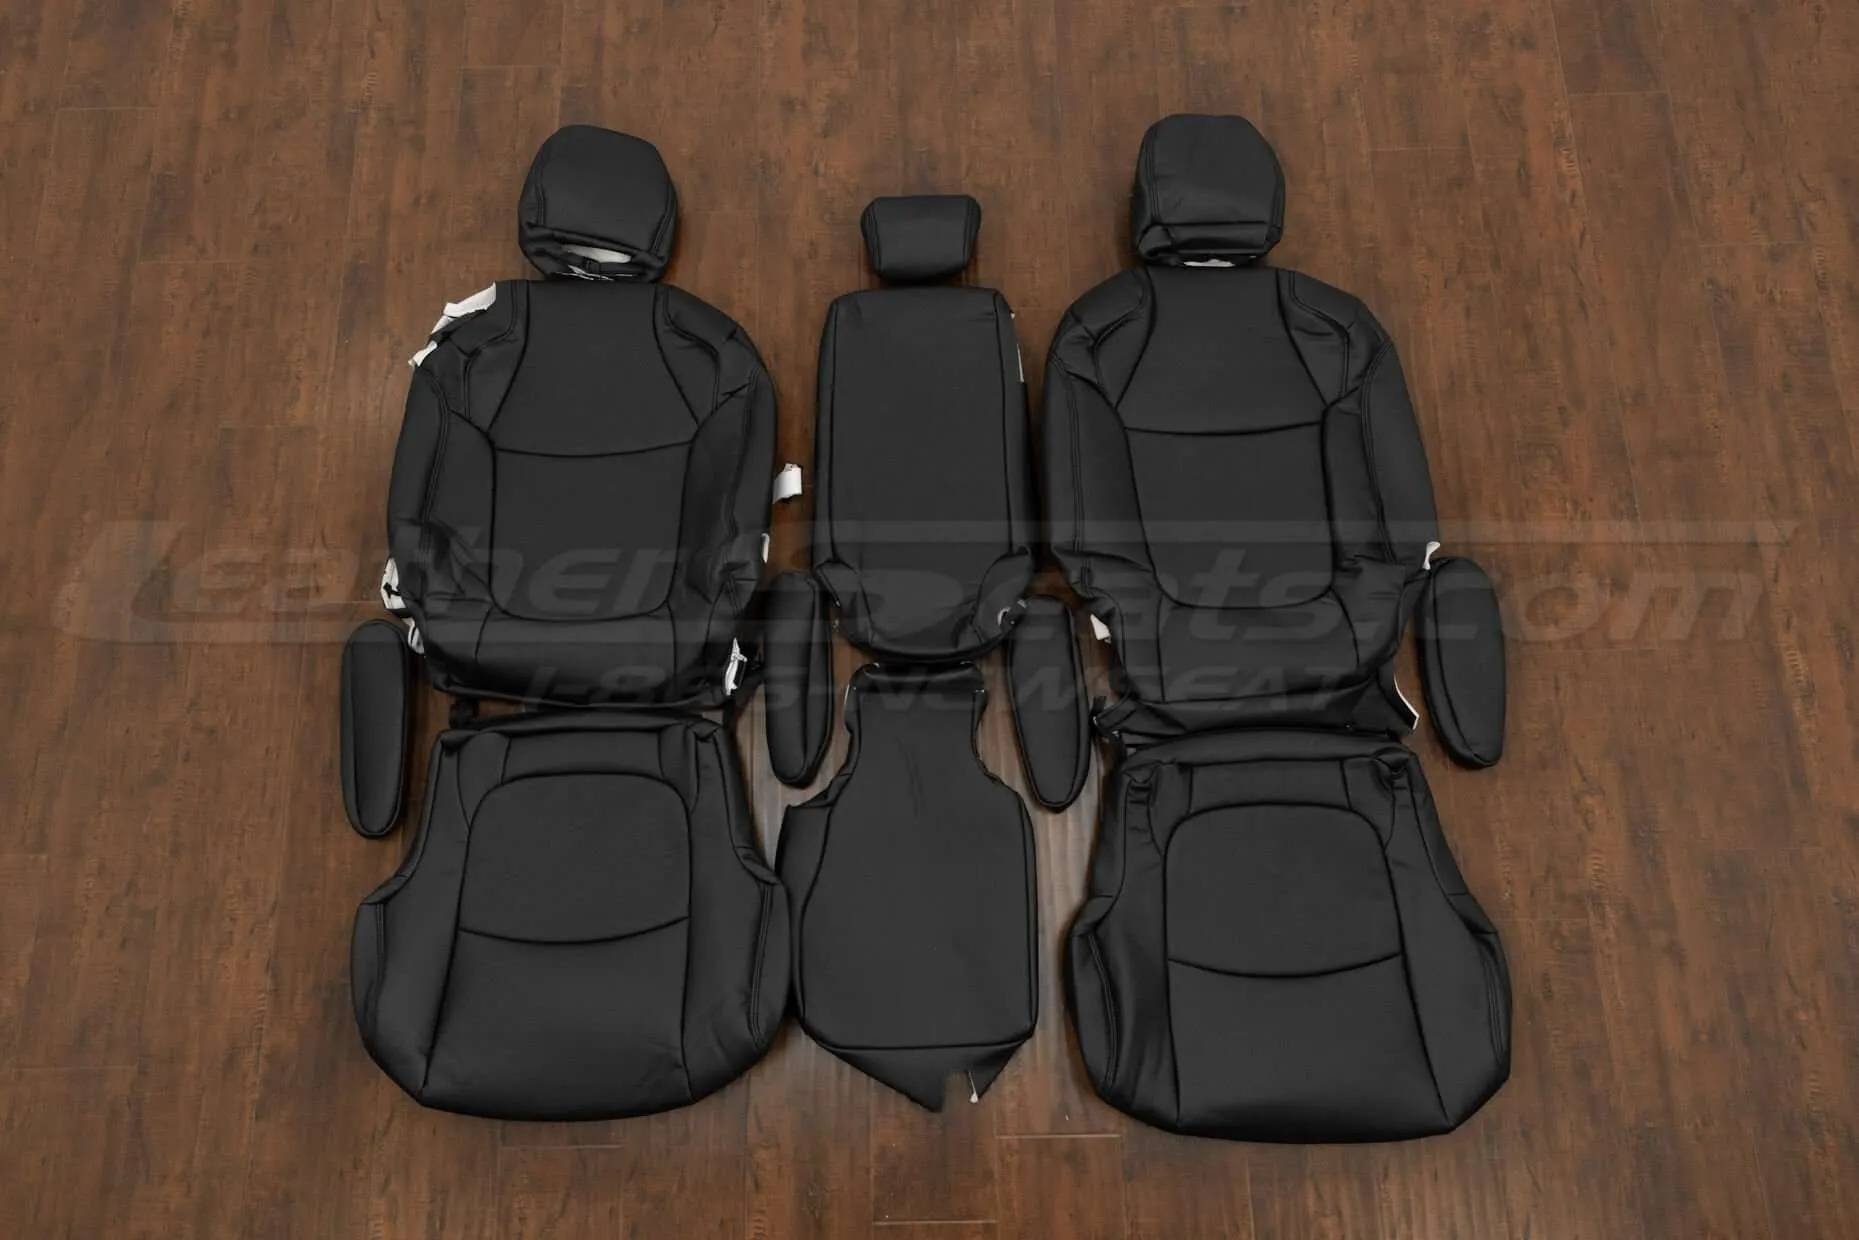 Toyota Sienna Leather Seat Kit - Black - Middle Row upholstery with armrests